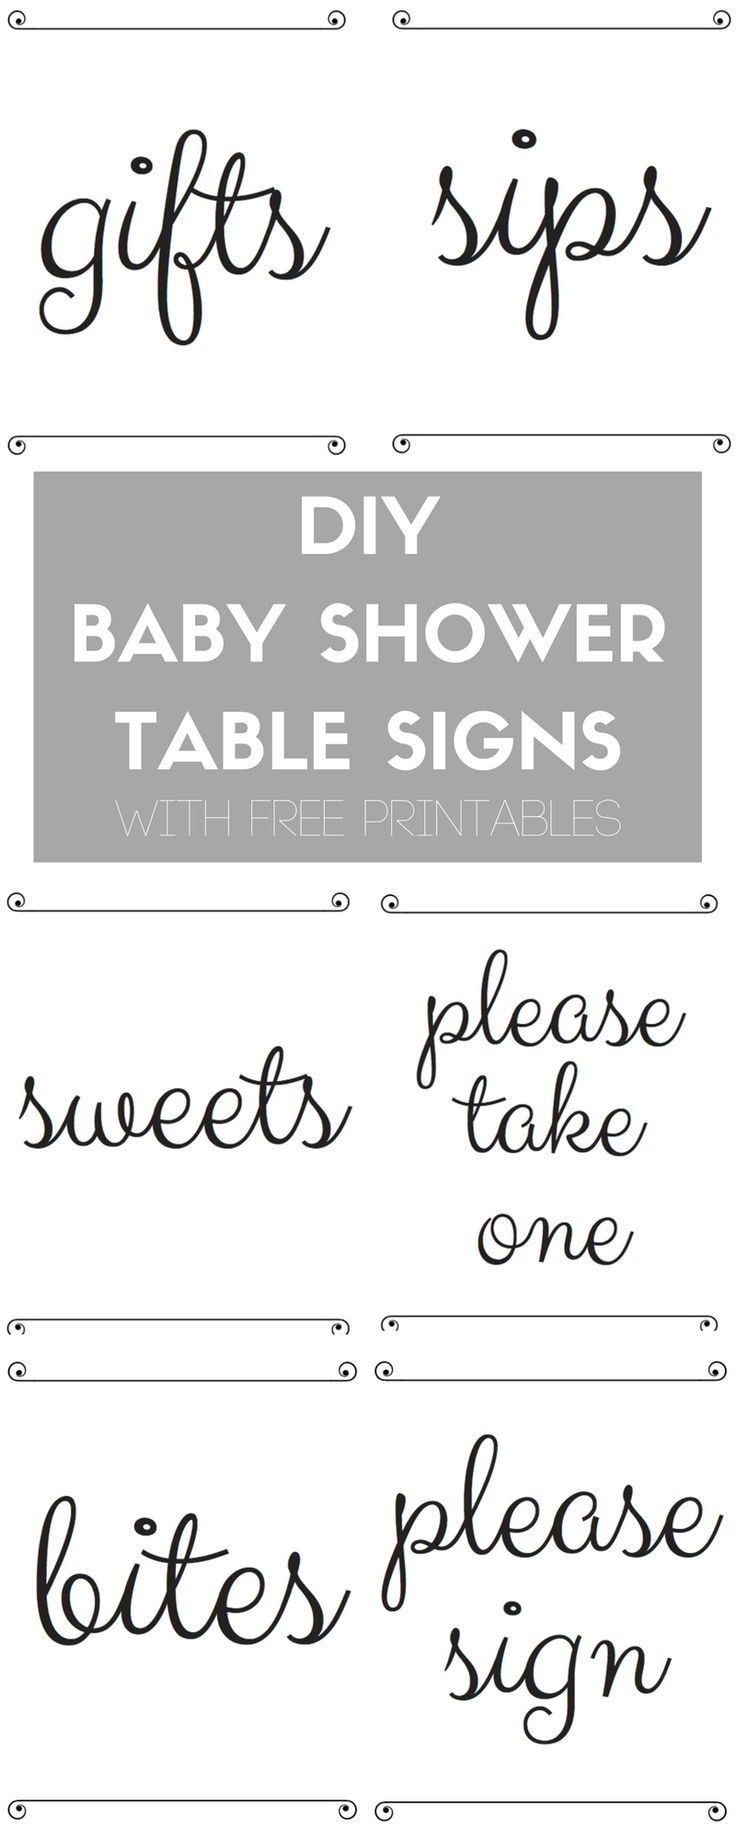 DIY Baby Shower Table Signs With Free Printables Katie Crenshaw Baby Shower Diy Diy Baby Stuff Baby Shower Table - Free Printable Baby Shower Table Signs